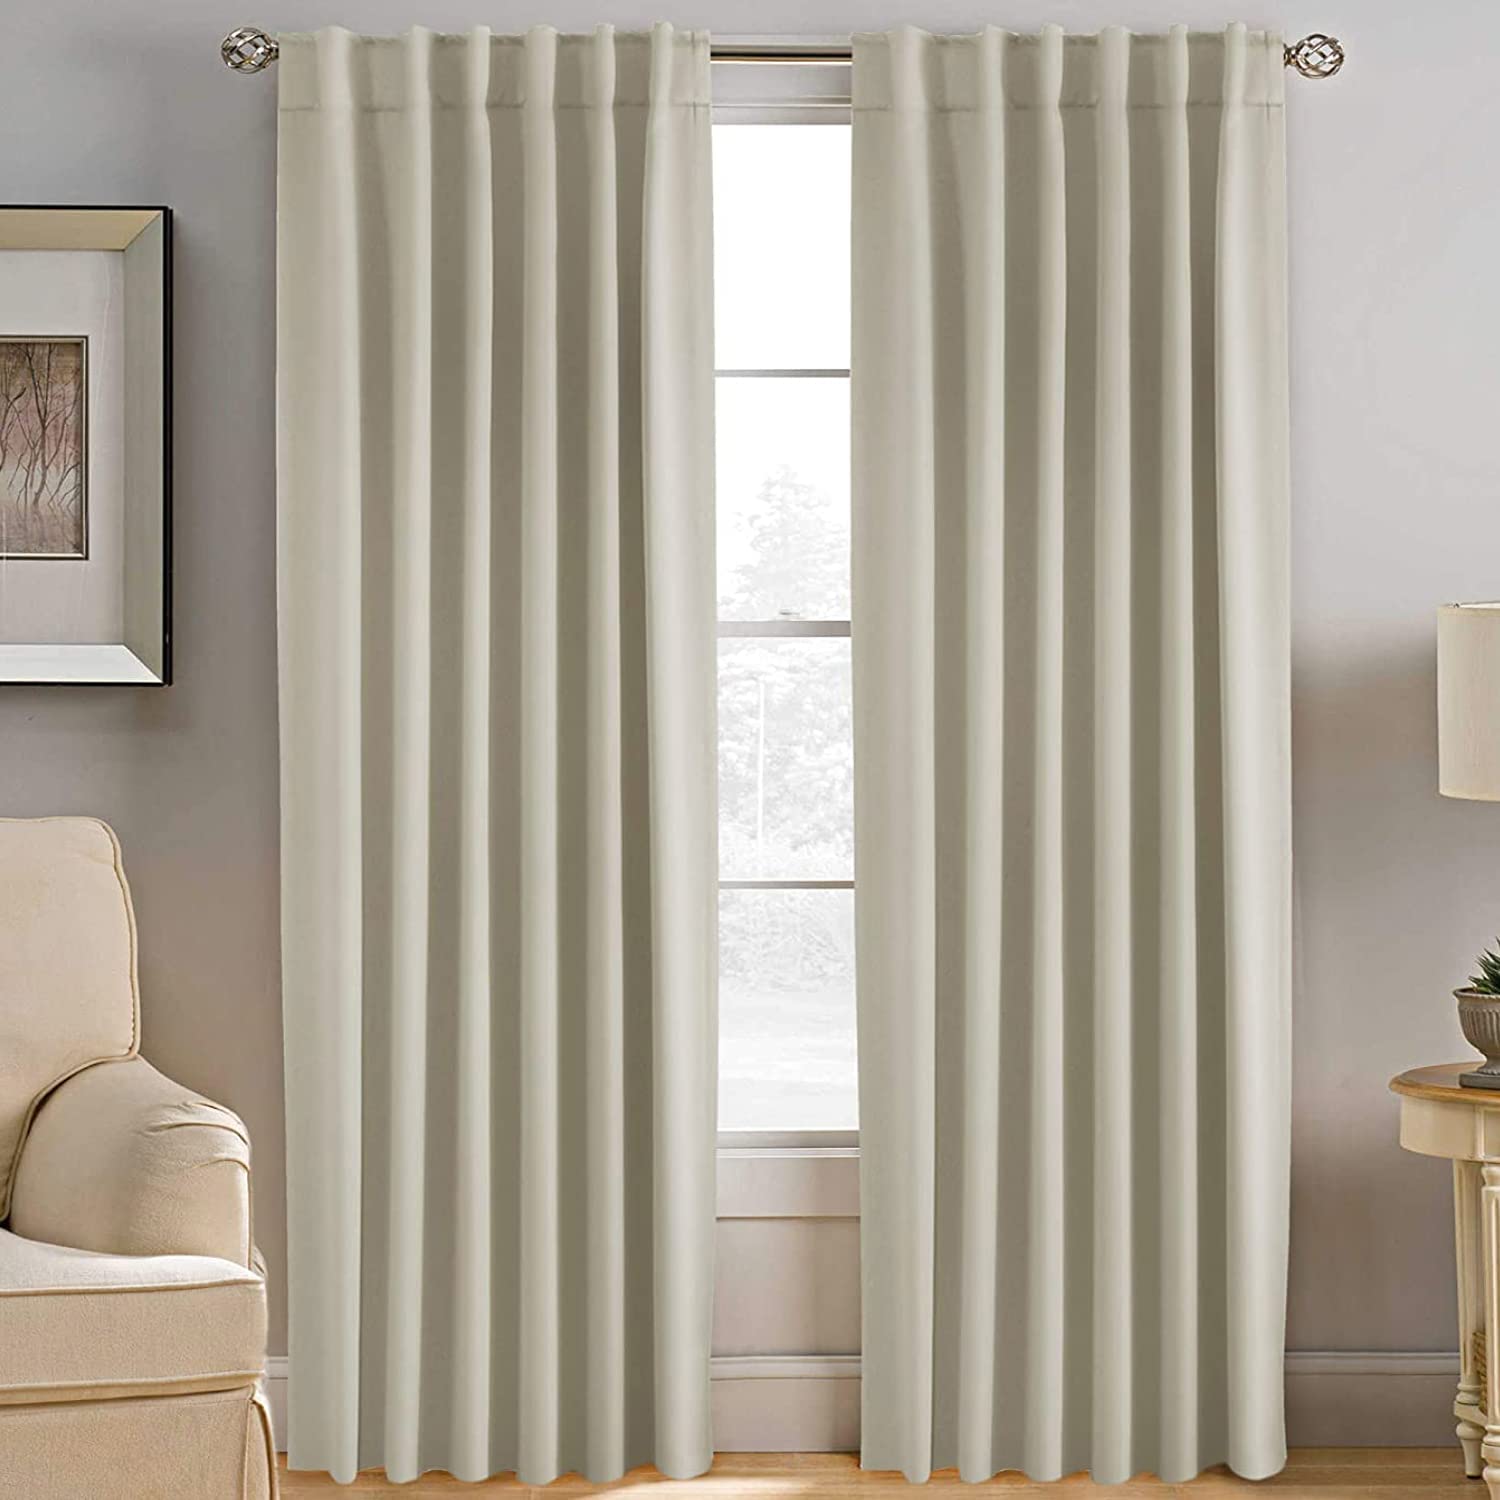 Top 5 Hotel Style Curtains for a Luxurious Home